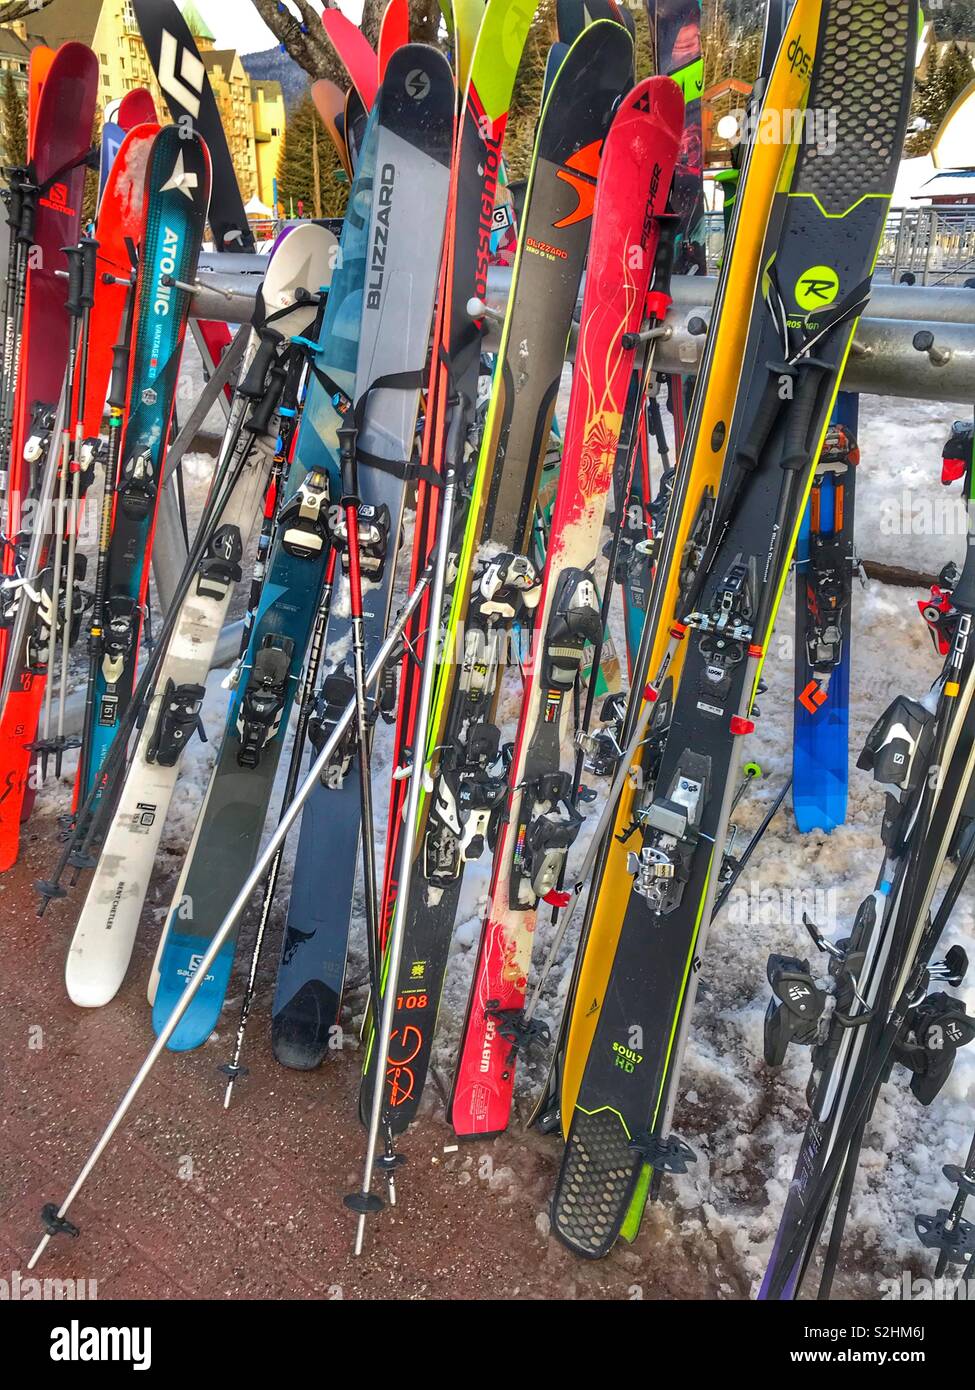 Row of skis and snowboards lined up at Whistler Blackcomb in ...